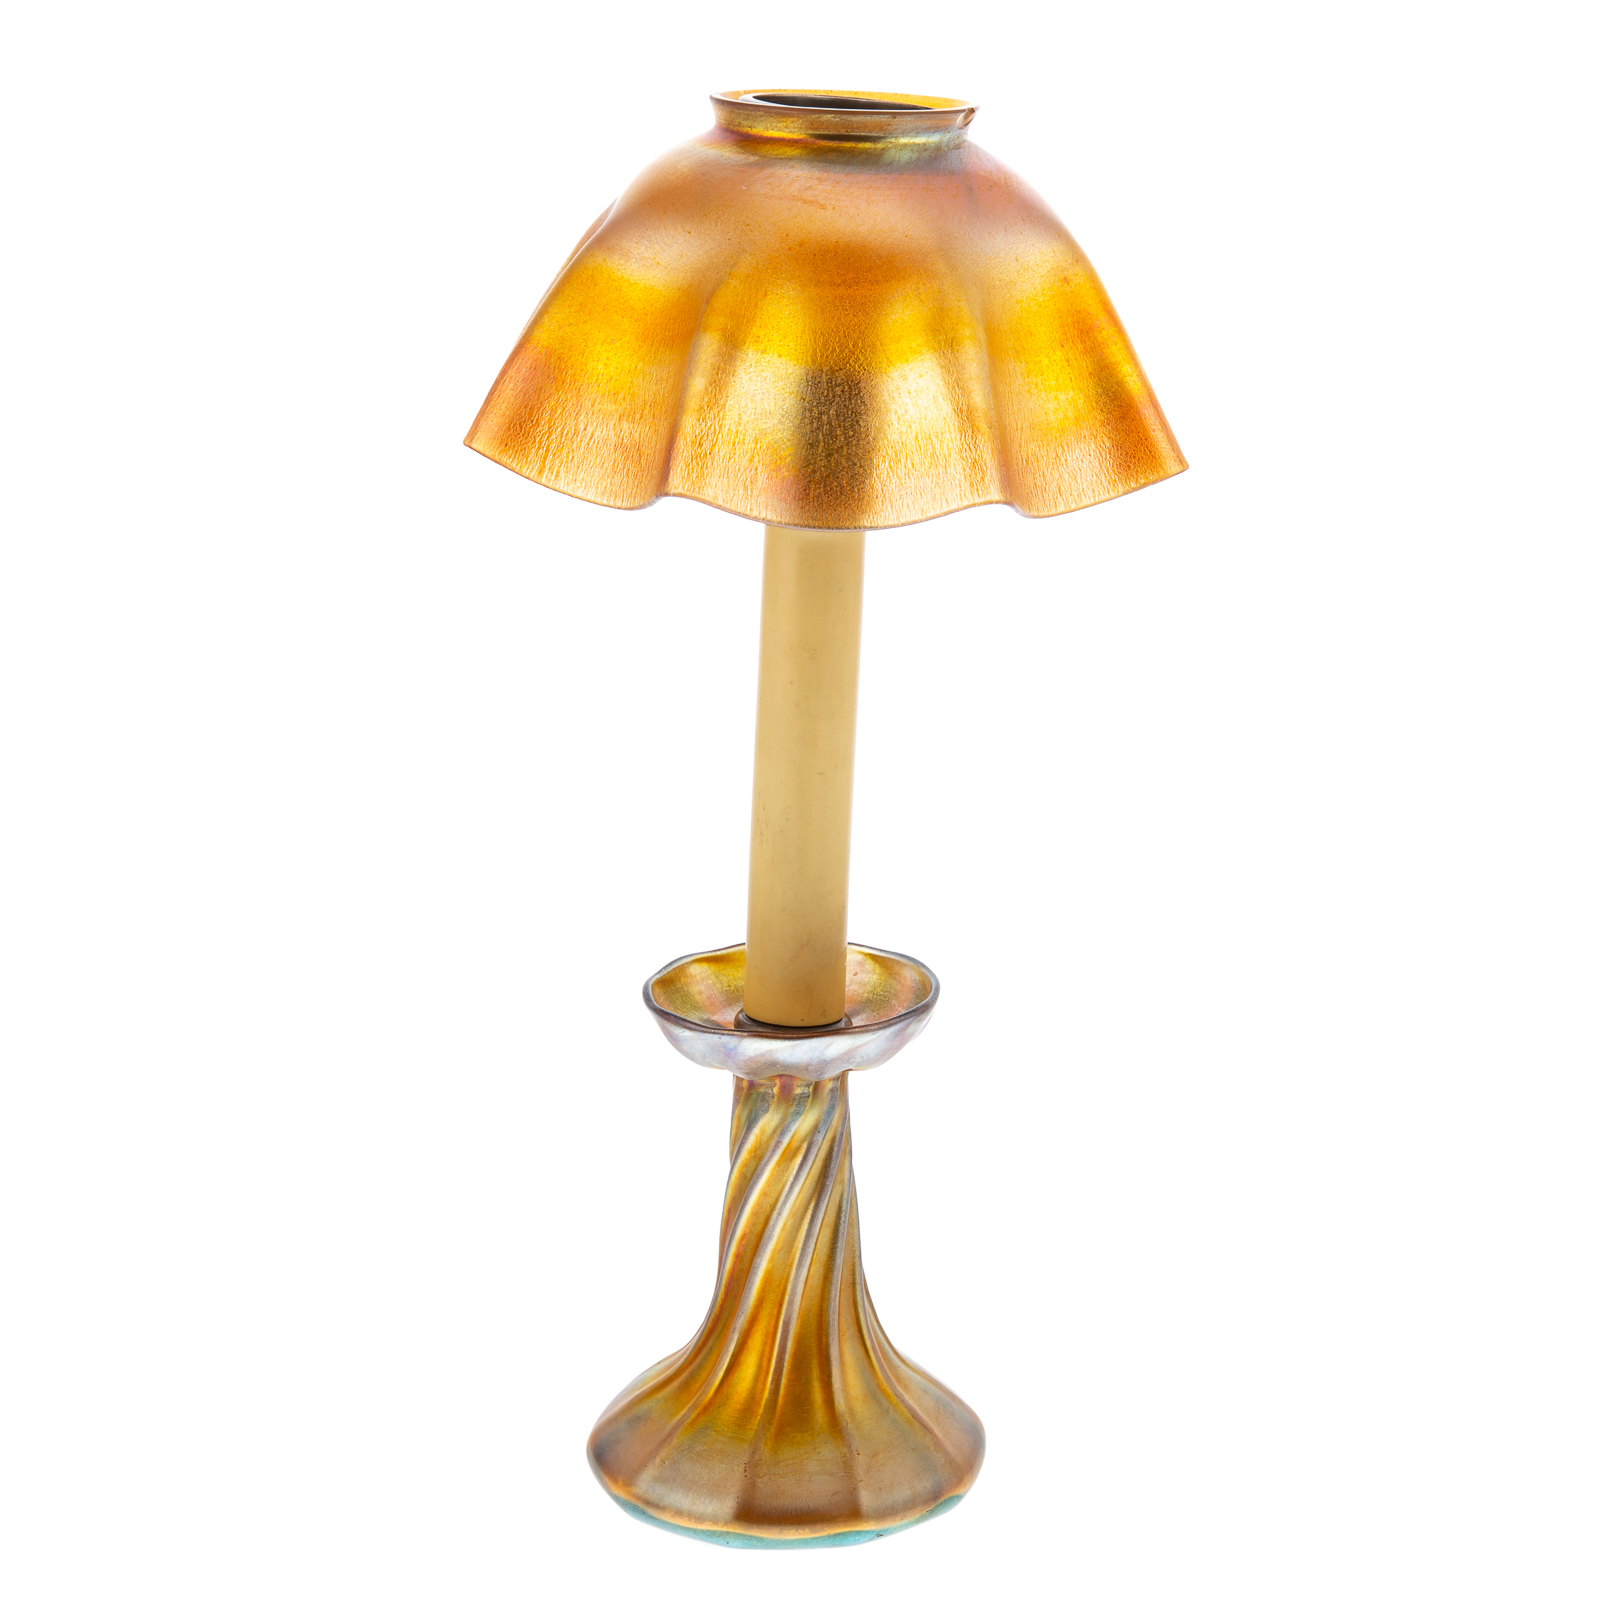 TIFFANY FAVRILLE GLASS CANDLESTICK 288834